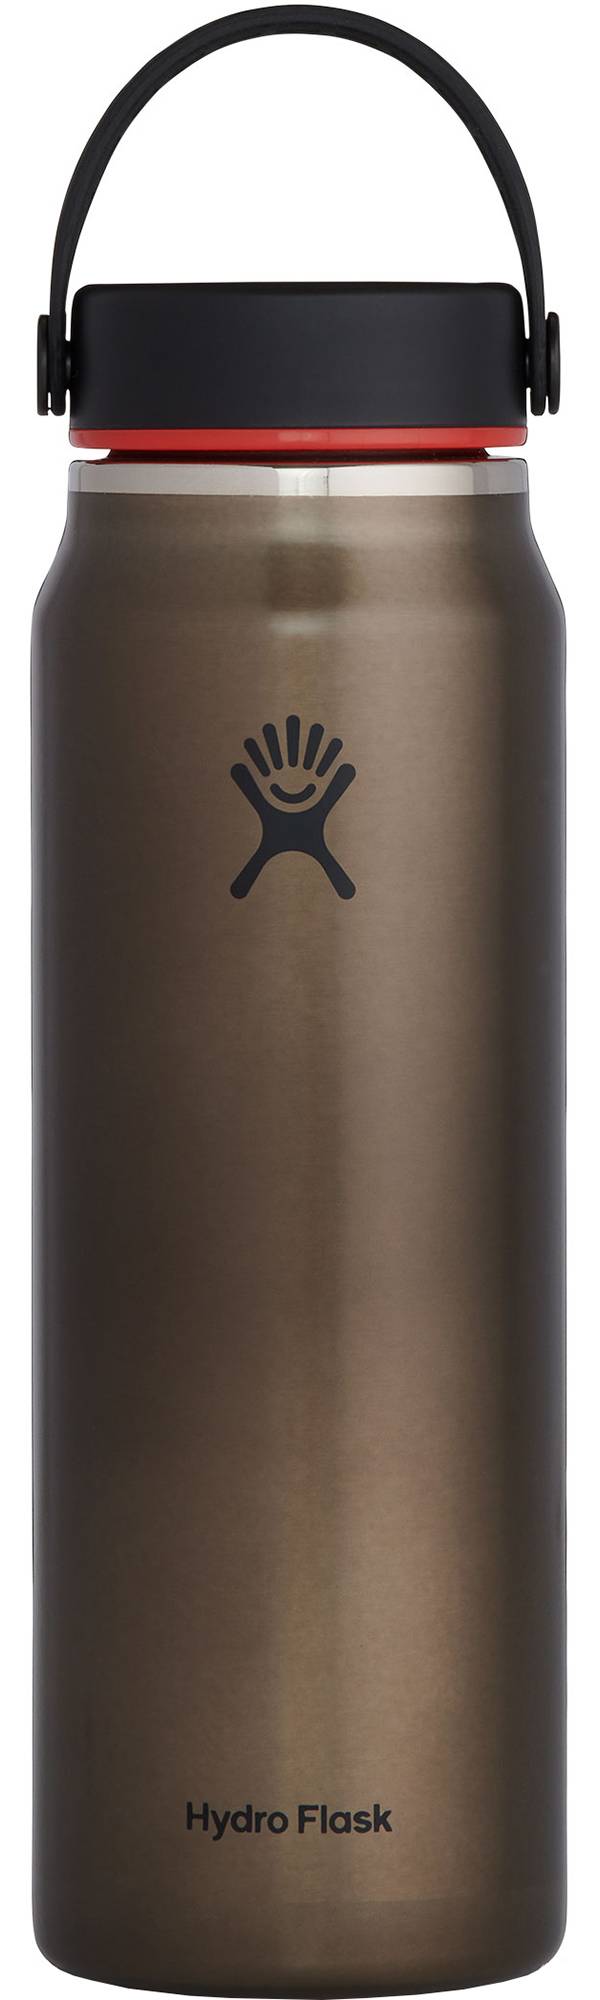 Hydro Flask 32 oz. Lightweight Wide Mouth product image